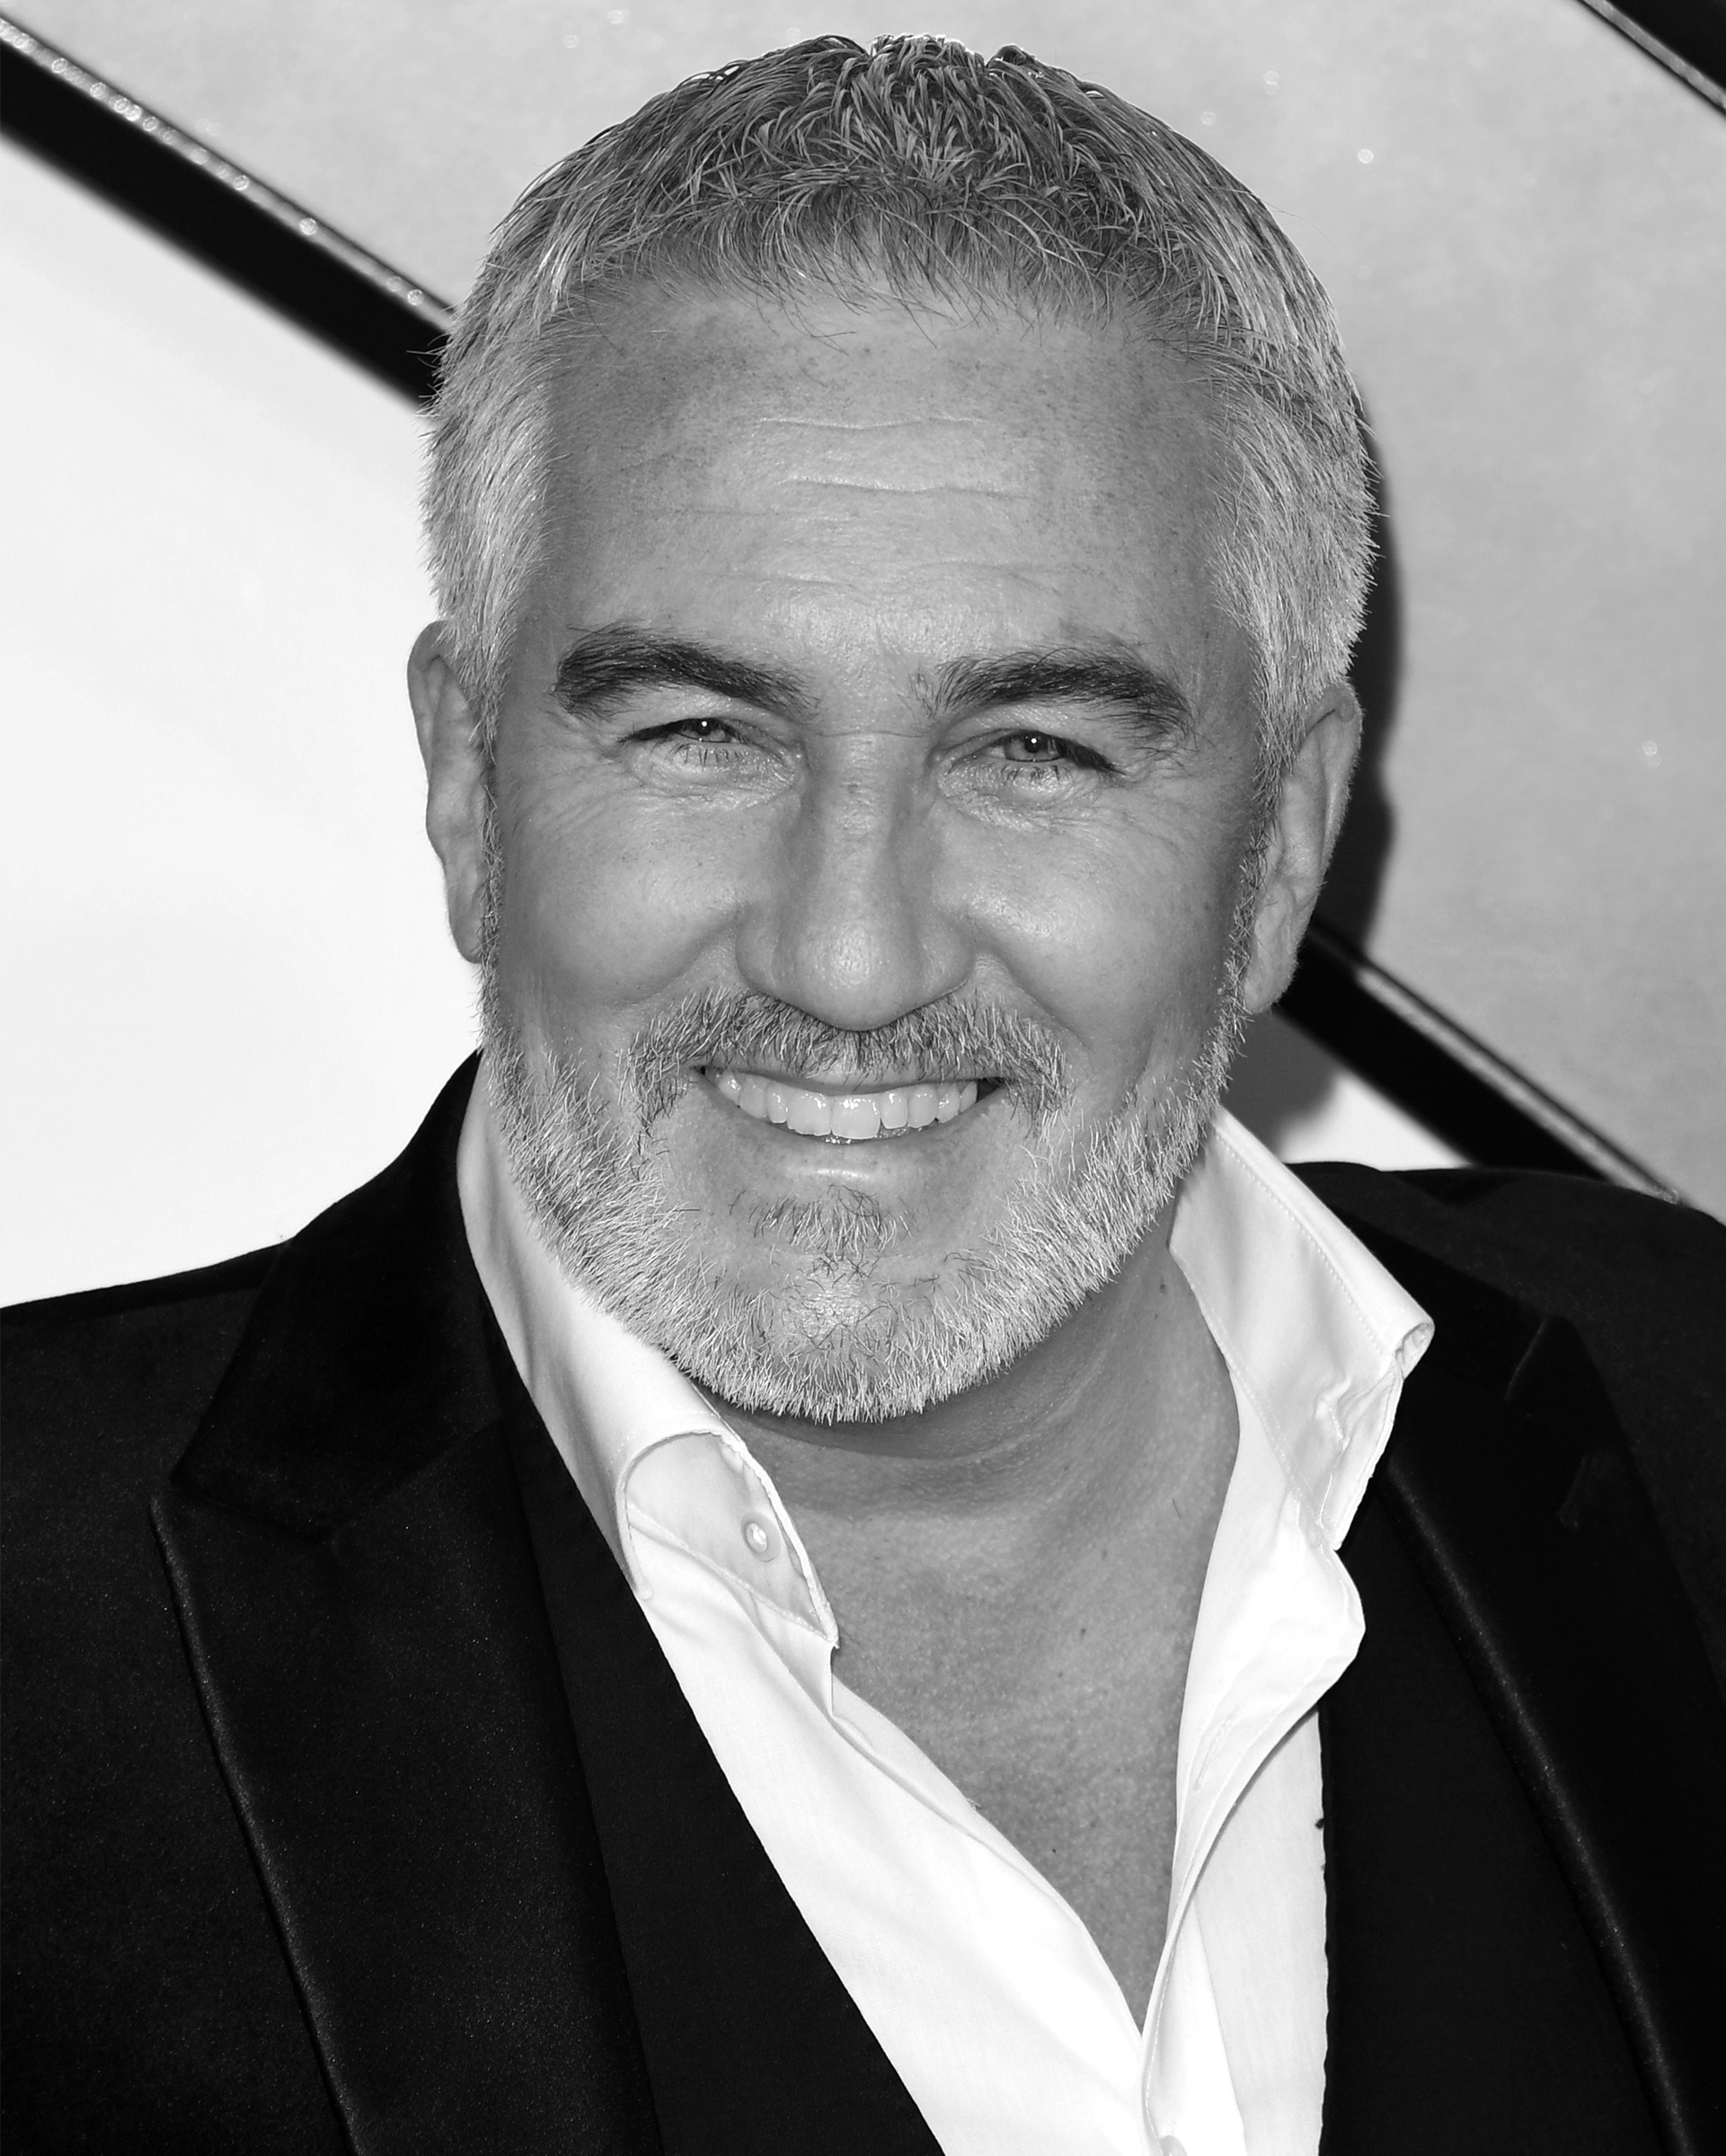 Paul Hollywood attends the World Premiere of "The King's Man" at Cineworld Leicester Square on December 06, 2021 in London, England.